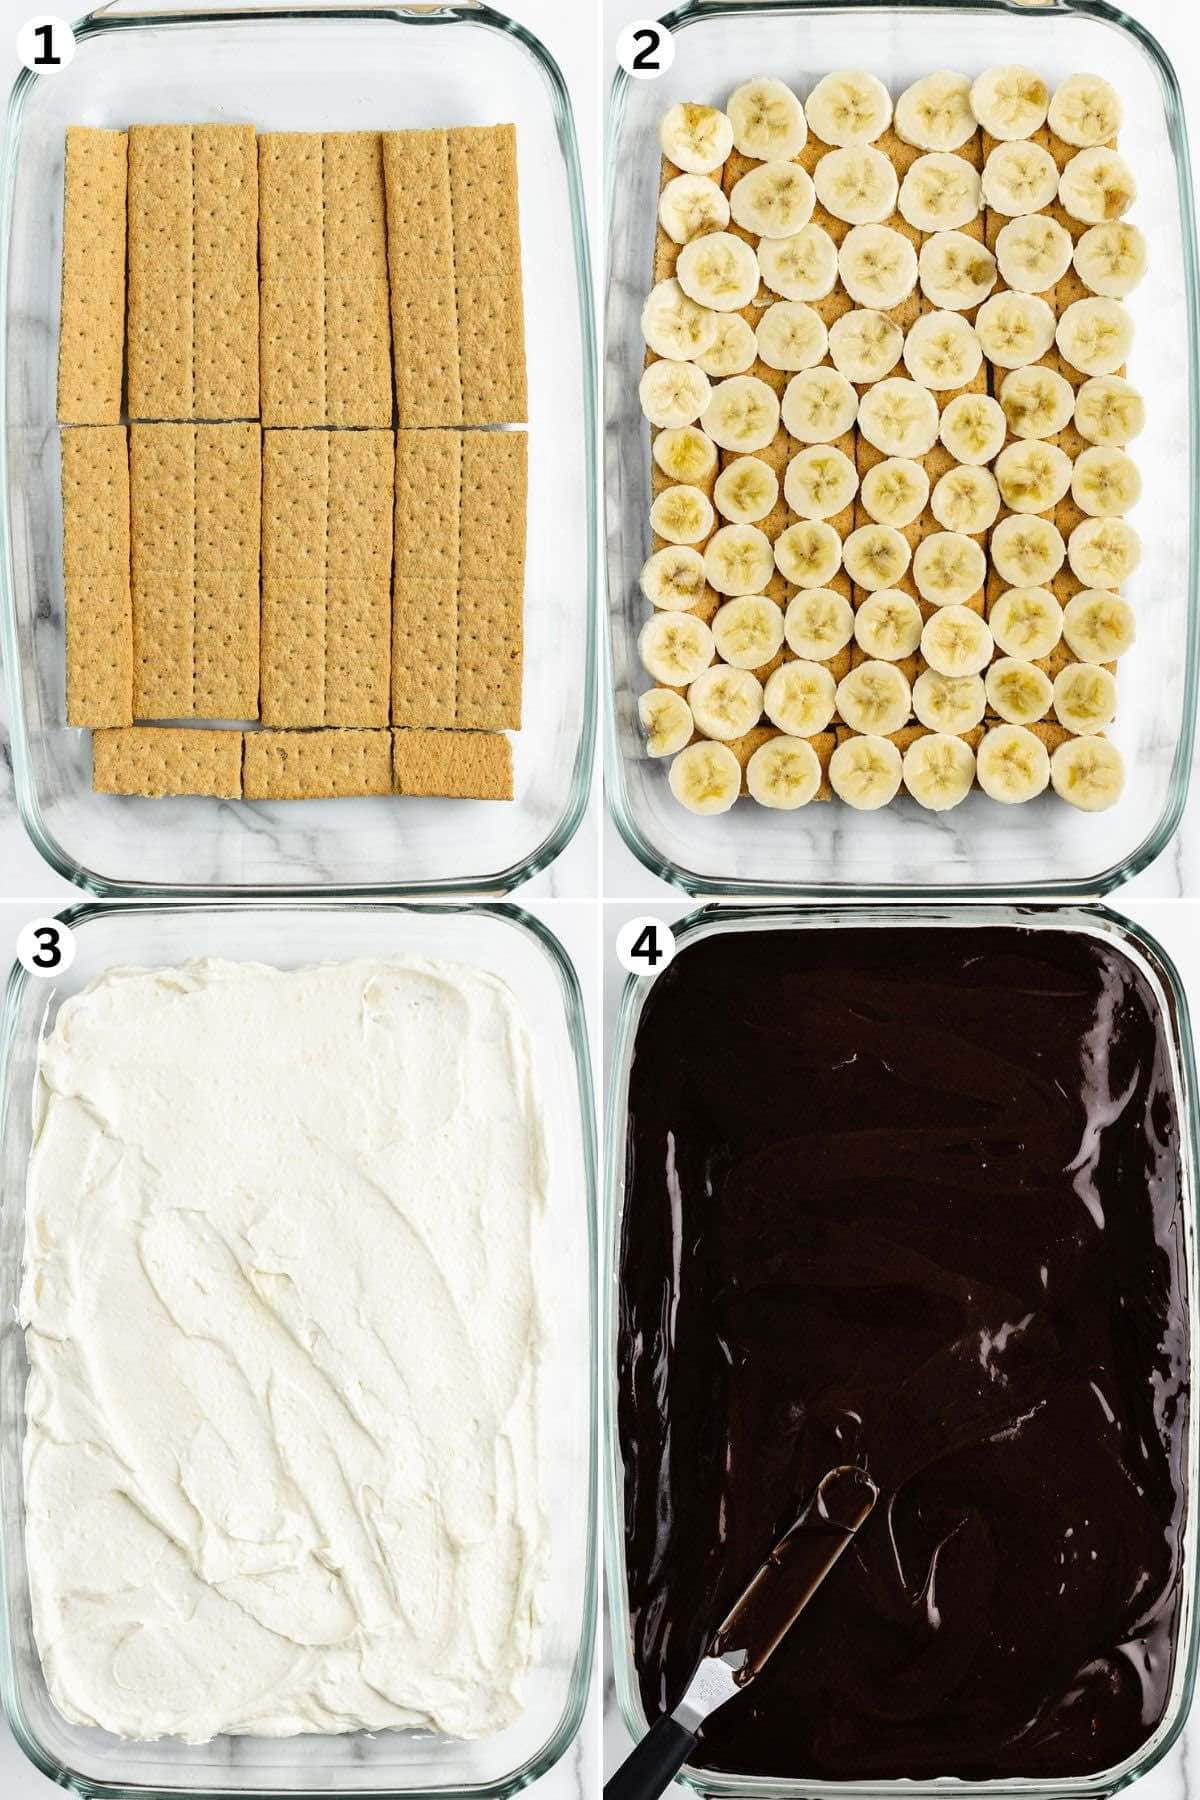 Line the bottom of a baking dish with a single layer of the graham crackers. Top with a single layer of sliced bananas. Spread the pudding mixture over the bananas. Pour the frosting over the top layer of graham crackers.